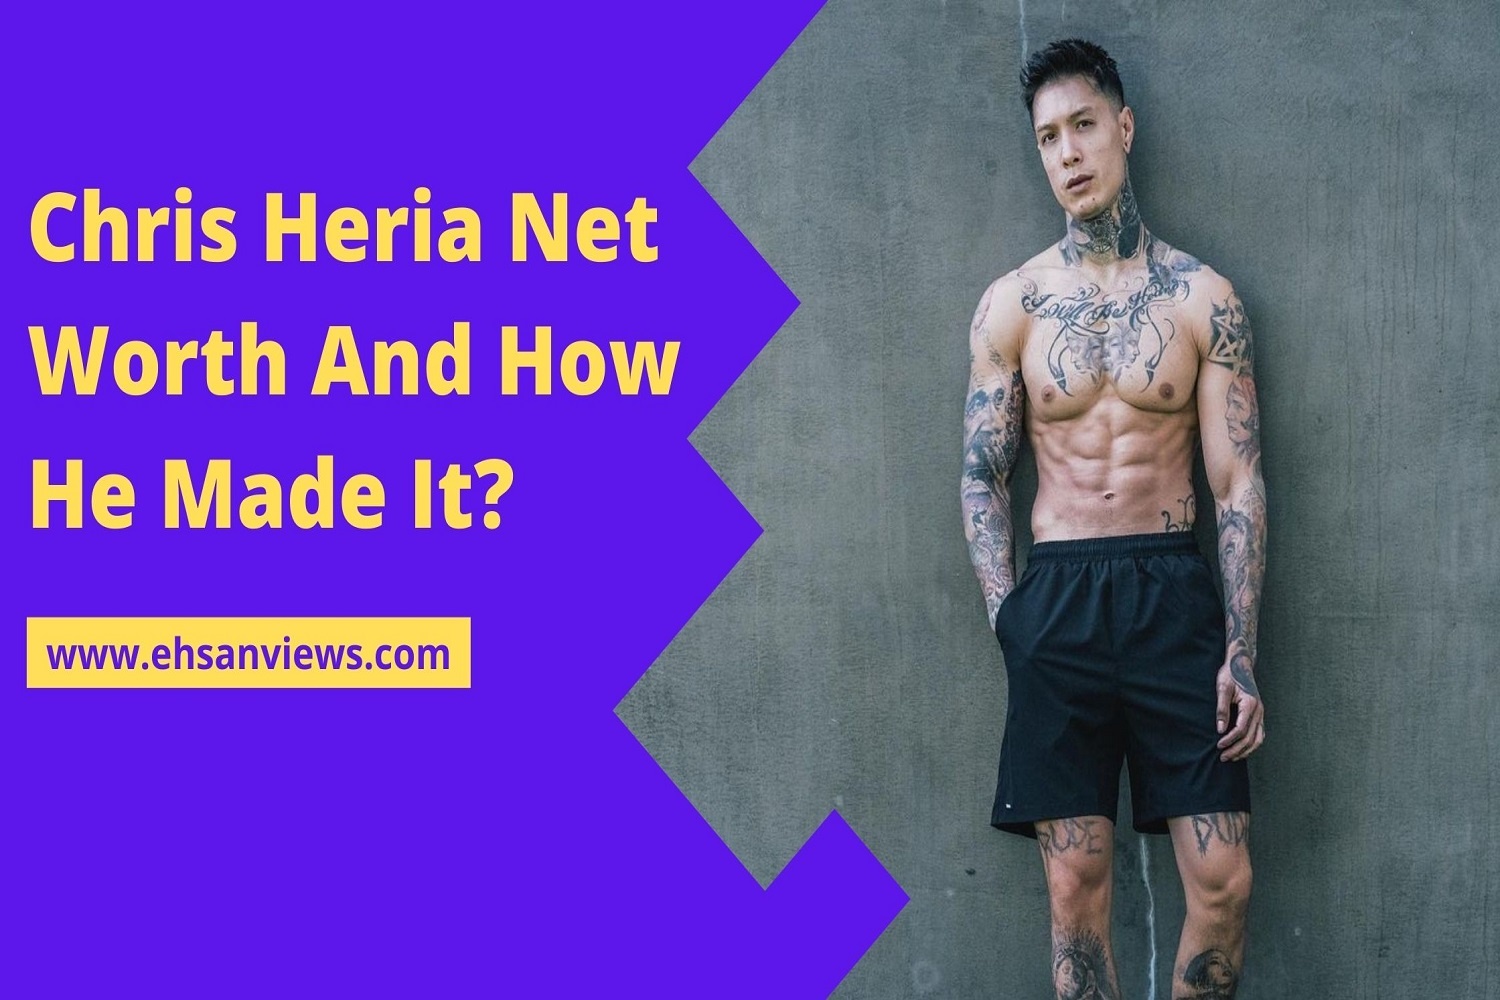 Chris Heria Net Worth And How He Made It? | Abdul Ehsan | Entrepreneur and Digital Marketing Consultant in Sri Lanka